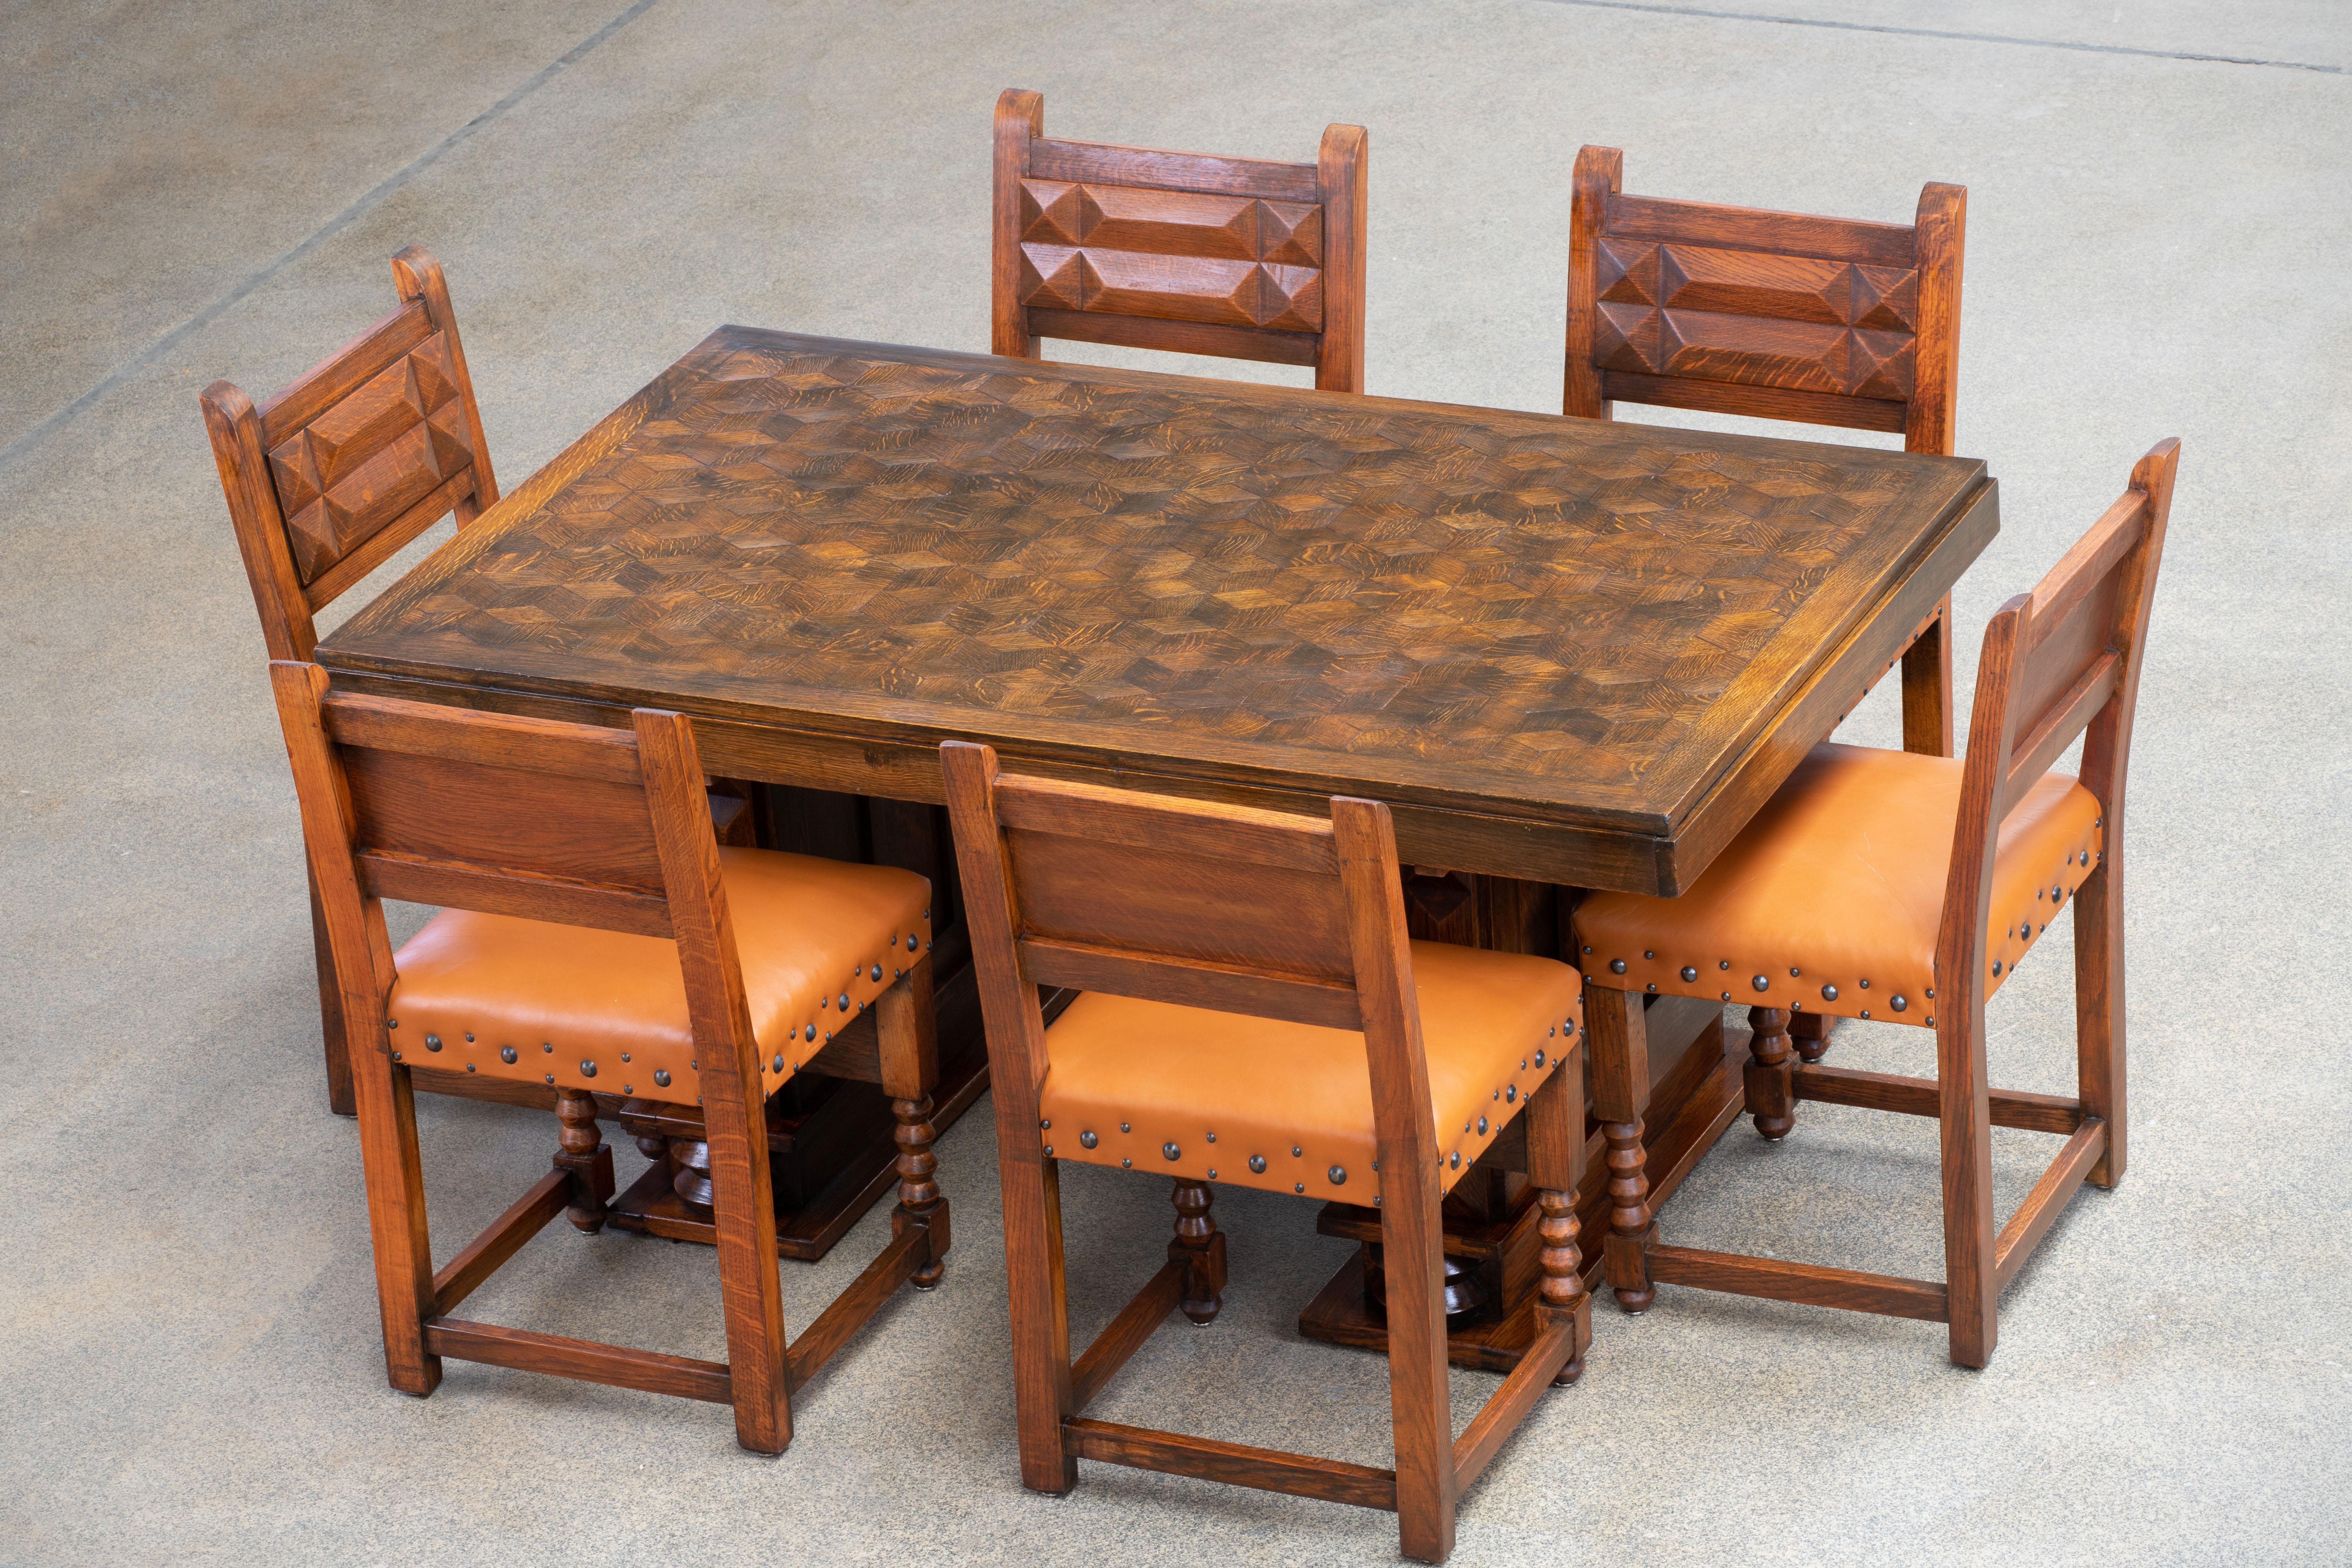 French Art Deco dining table. The table features stunning oak with a stunning patina. The top is encrusted with an octogonal marquetry. 
It rests on tall and Brutalist tapered legs.
The table is in excellent original condition, with minor wear